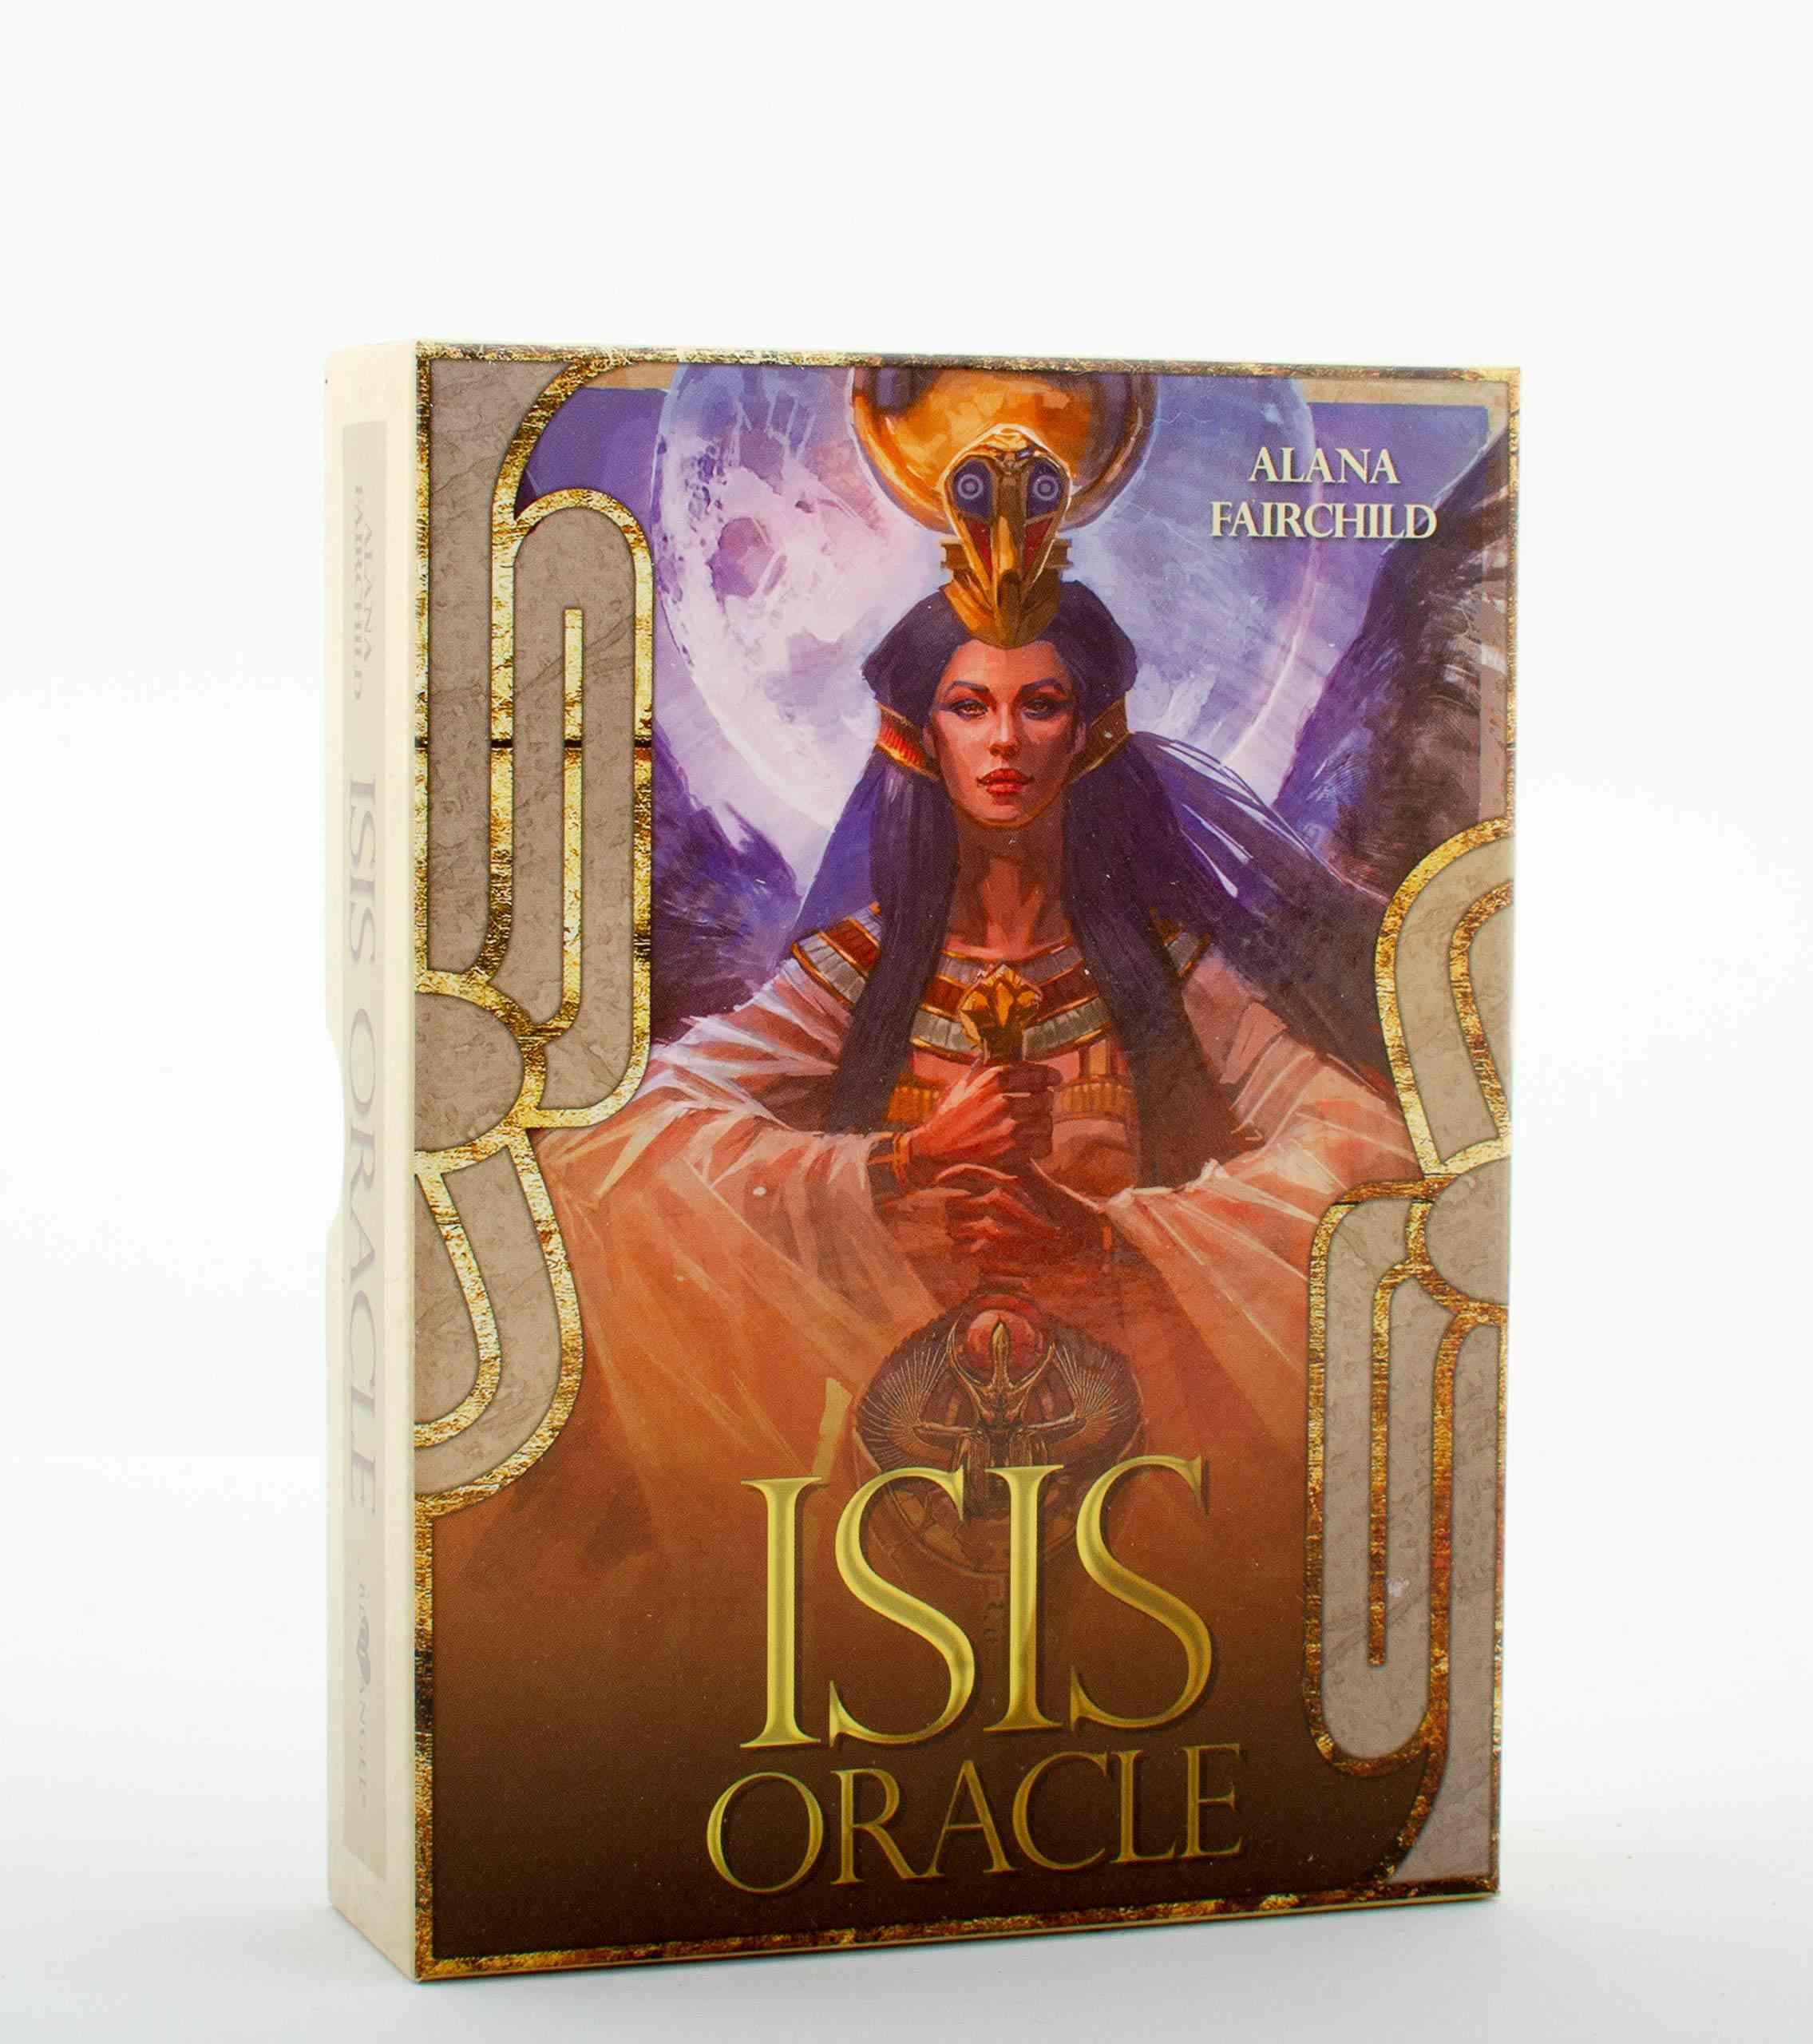 New Isis Oracle Cards Tarot Cards Card Game Tarot Deck With Guidebook Board Game For Adult Family Oracle For Fate Divination